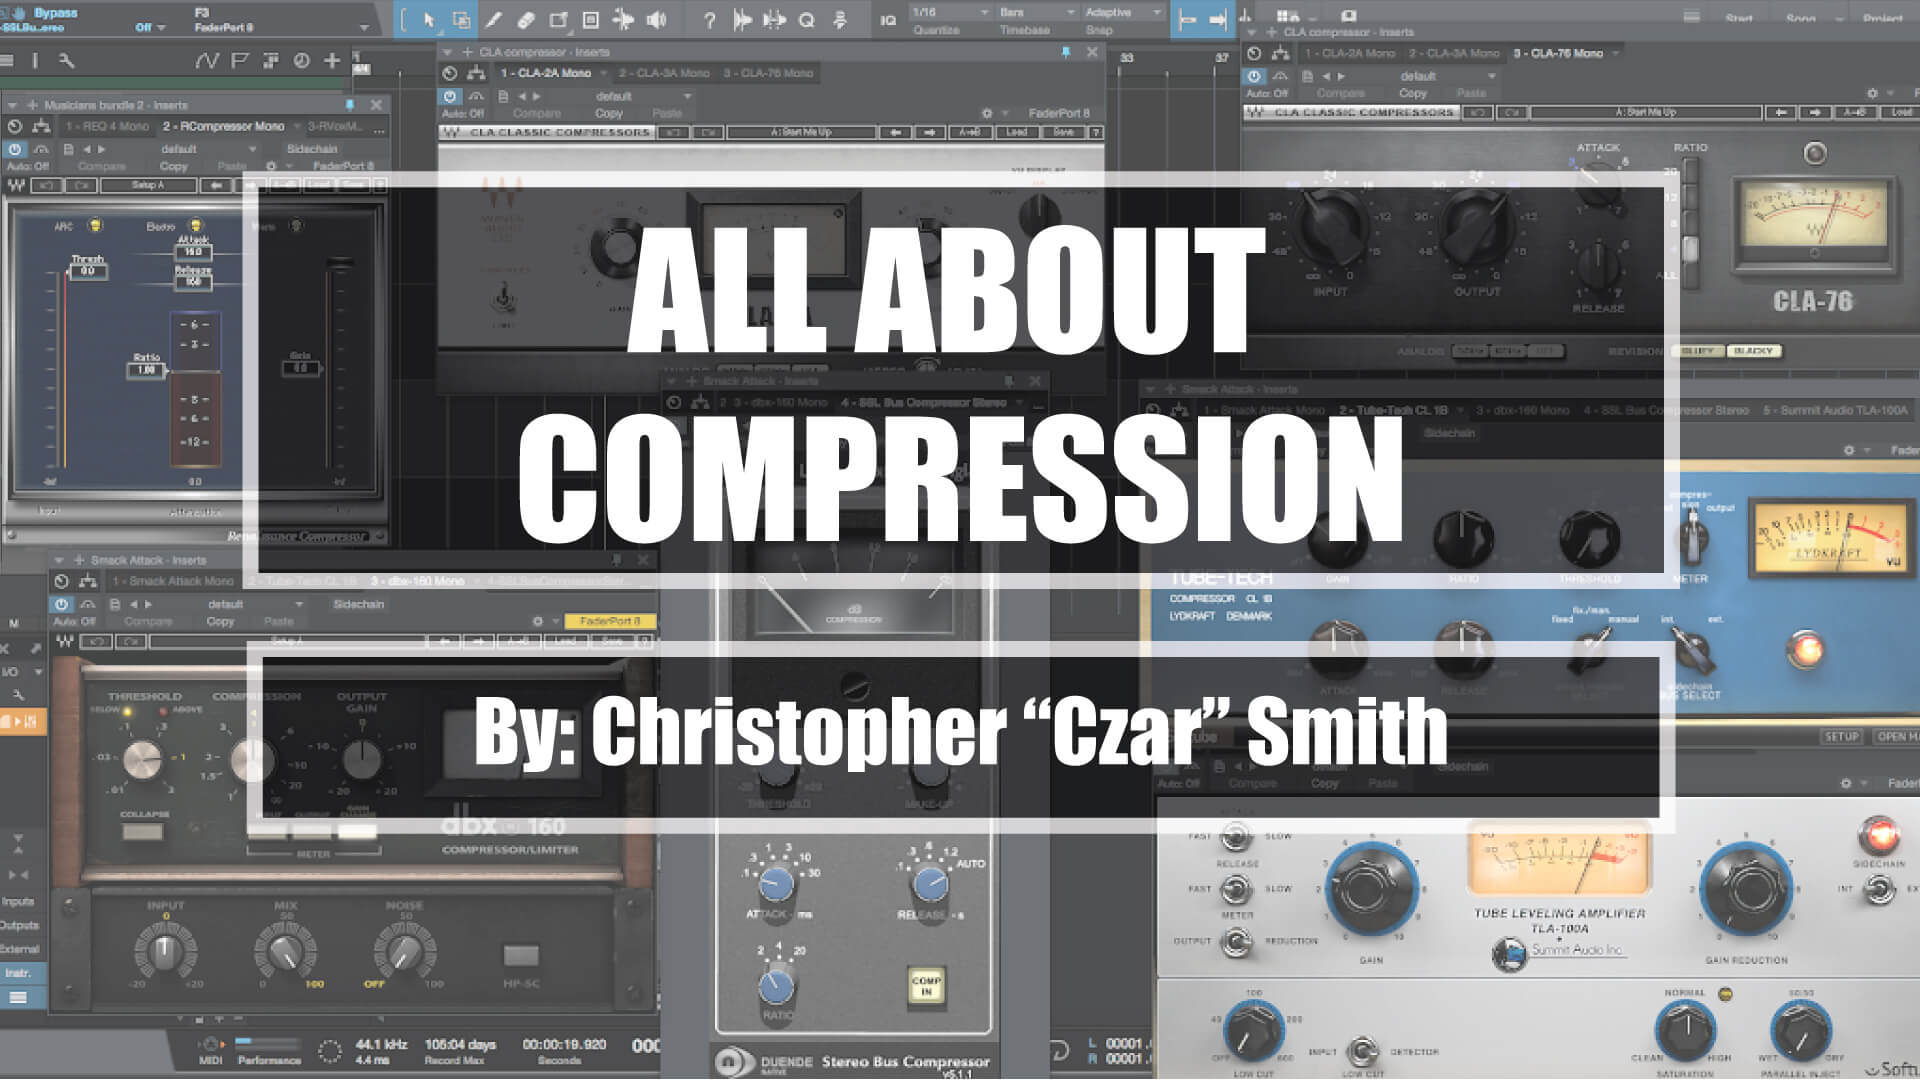 All About Compression